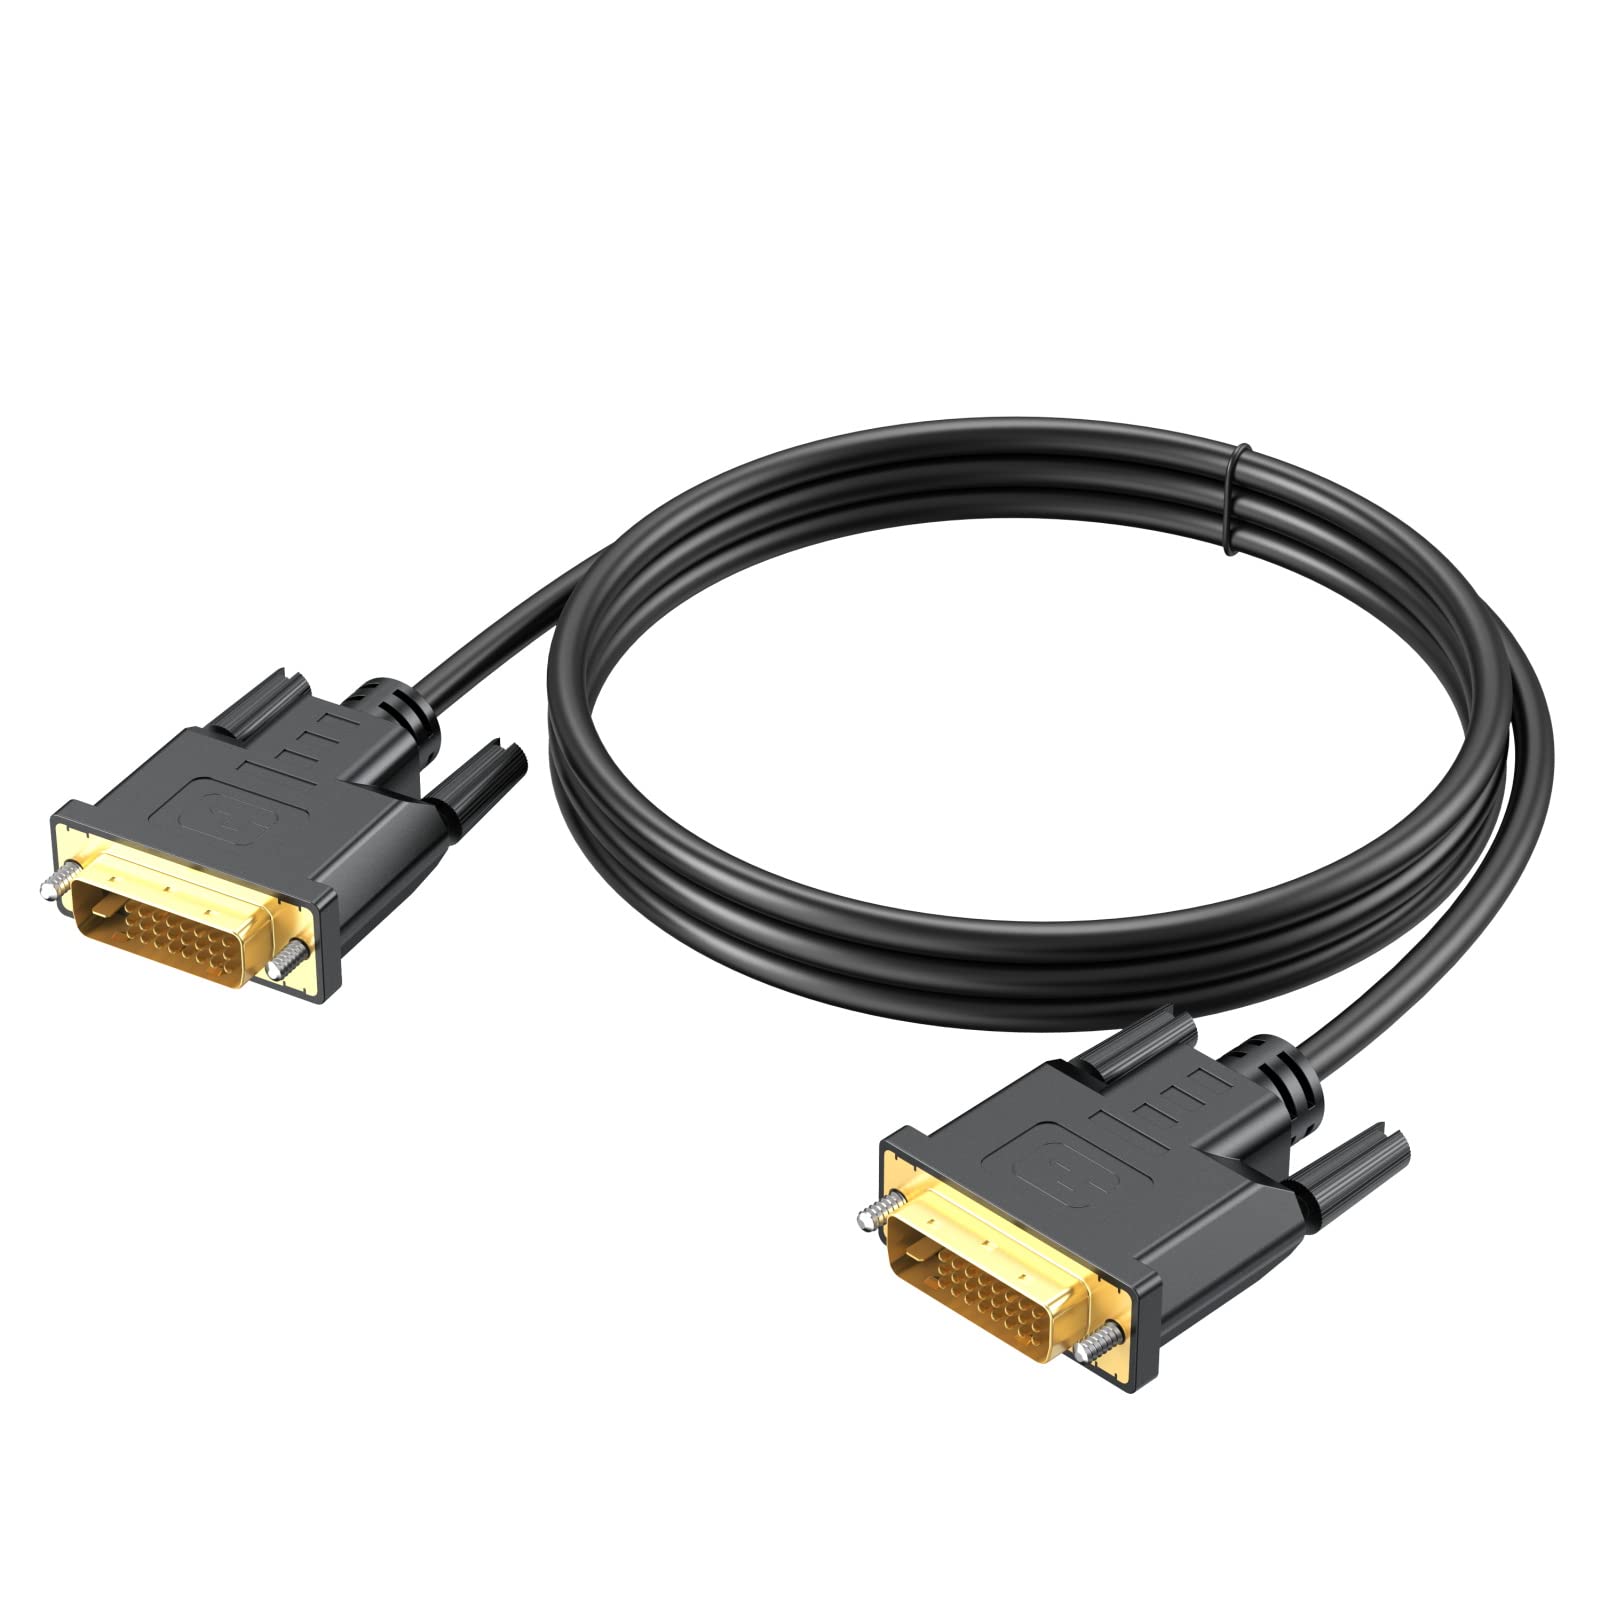 URELEGAN DVI to DVI Cable 6 Feet, DVI to DVI-D 24+1 Cable Male to Male Digital Video Monitor Cable for HDTV, Gaming, Monitor, Projector